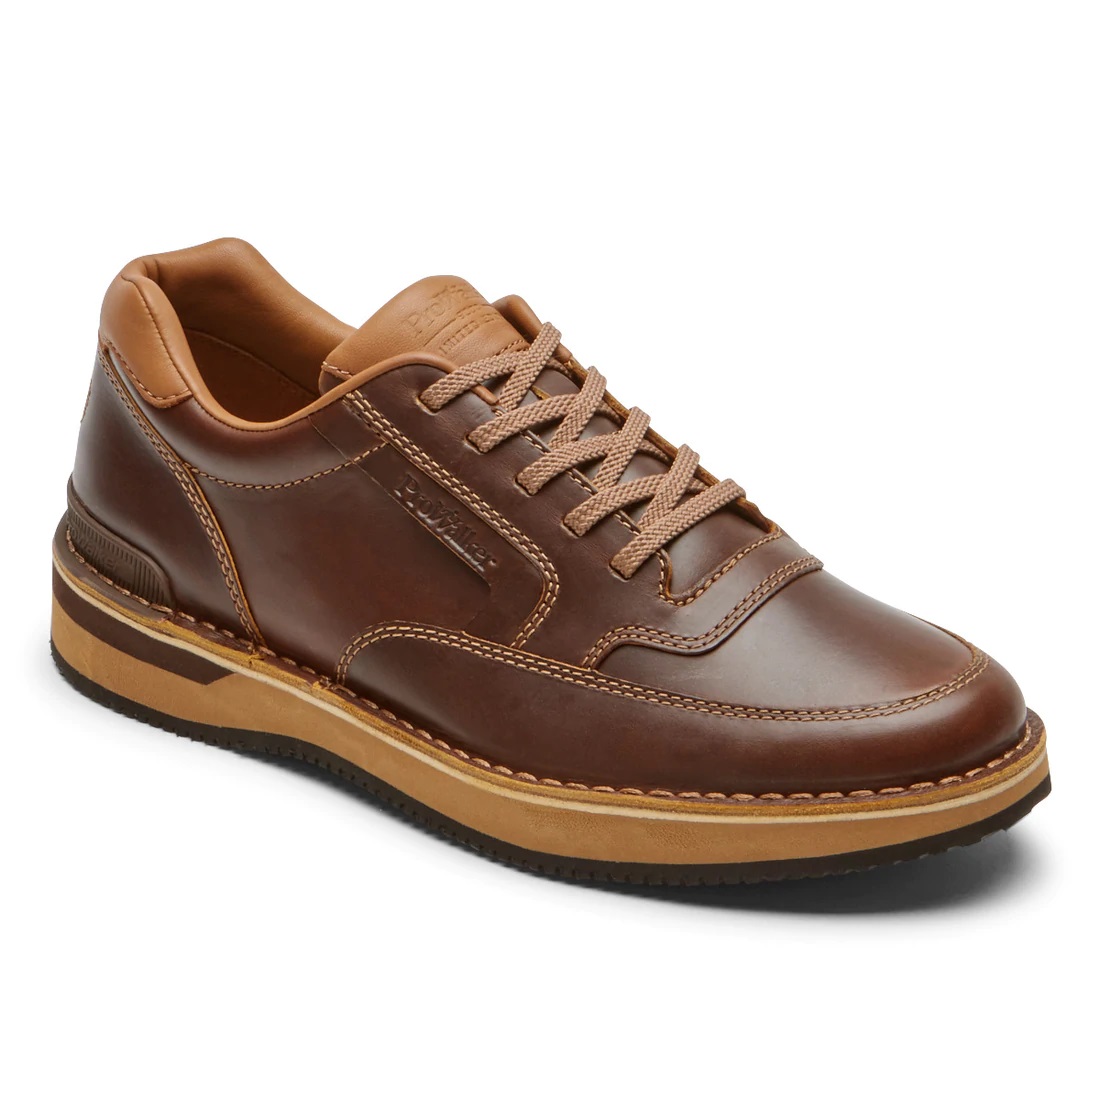 Rockport Shoes Review - Must Read This Before Buying